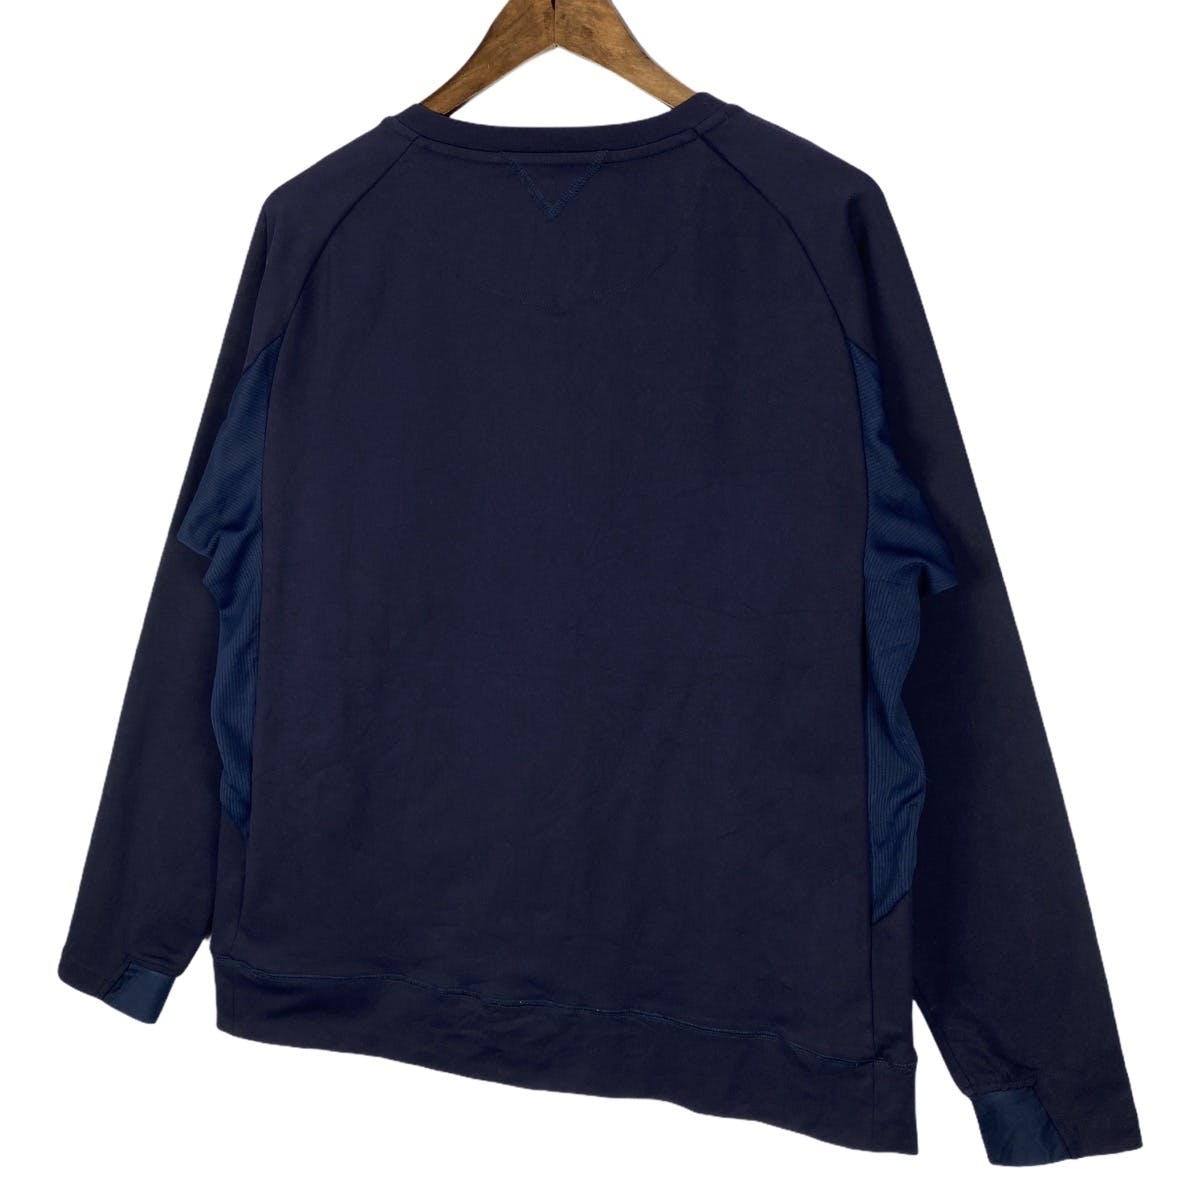 White Mountaineering SS 2016 Collection Sweatshirt - 11